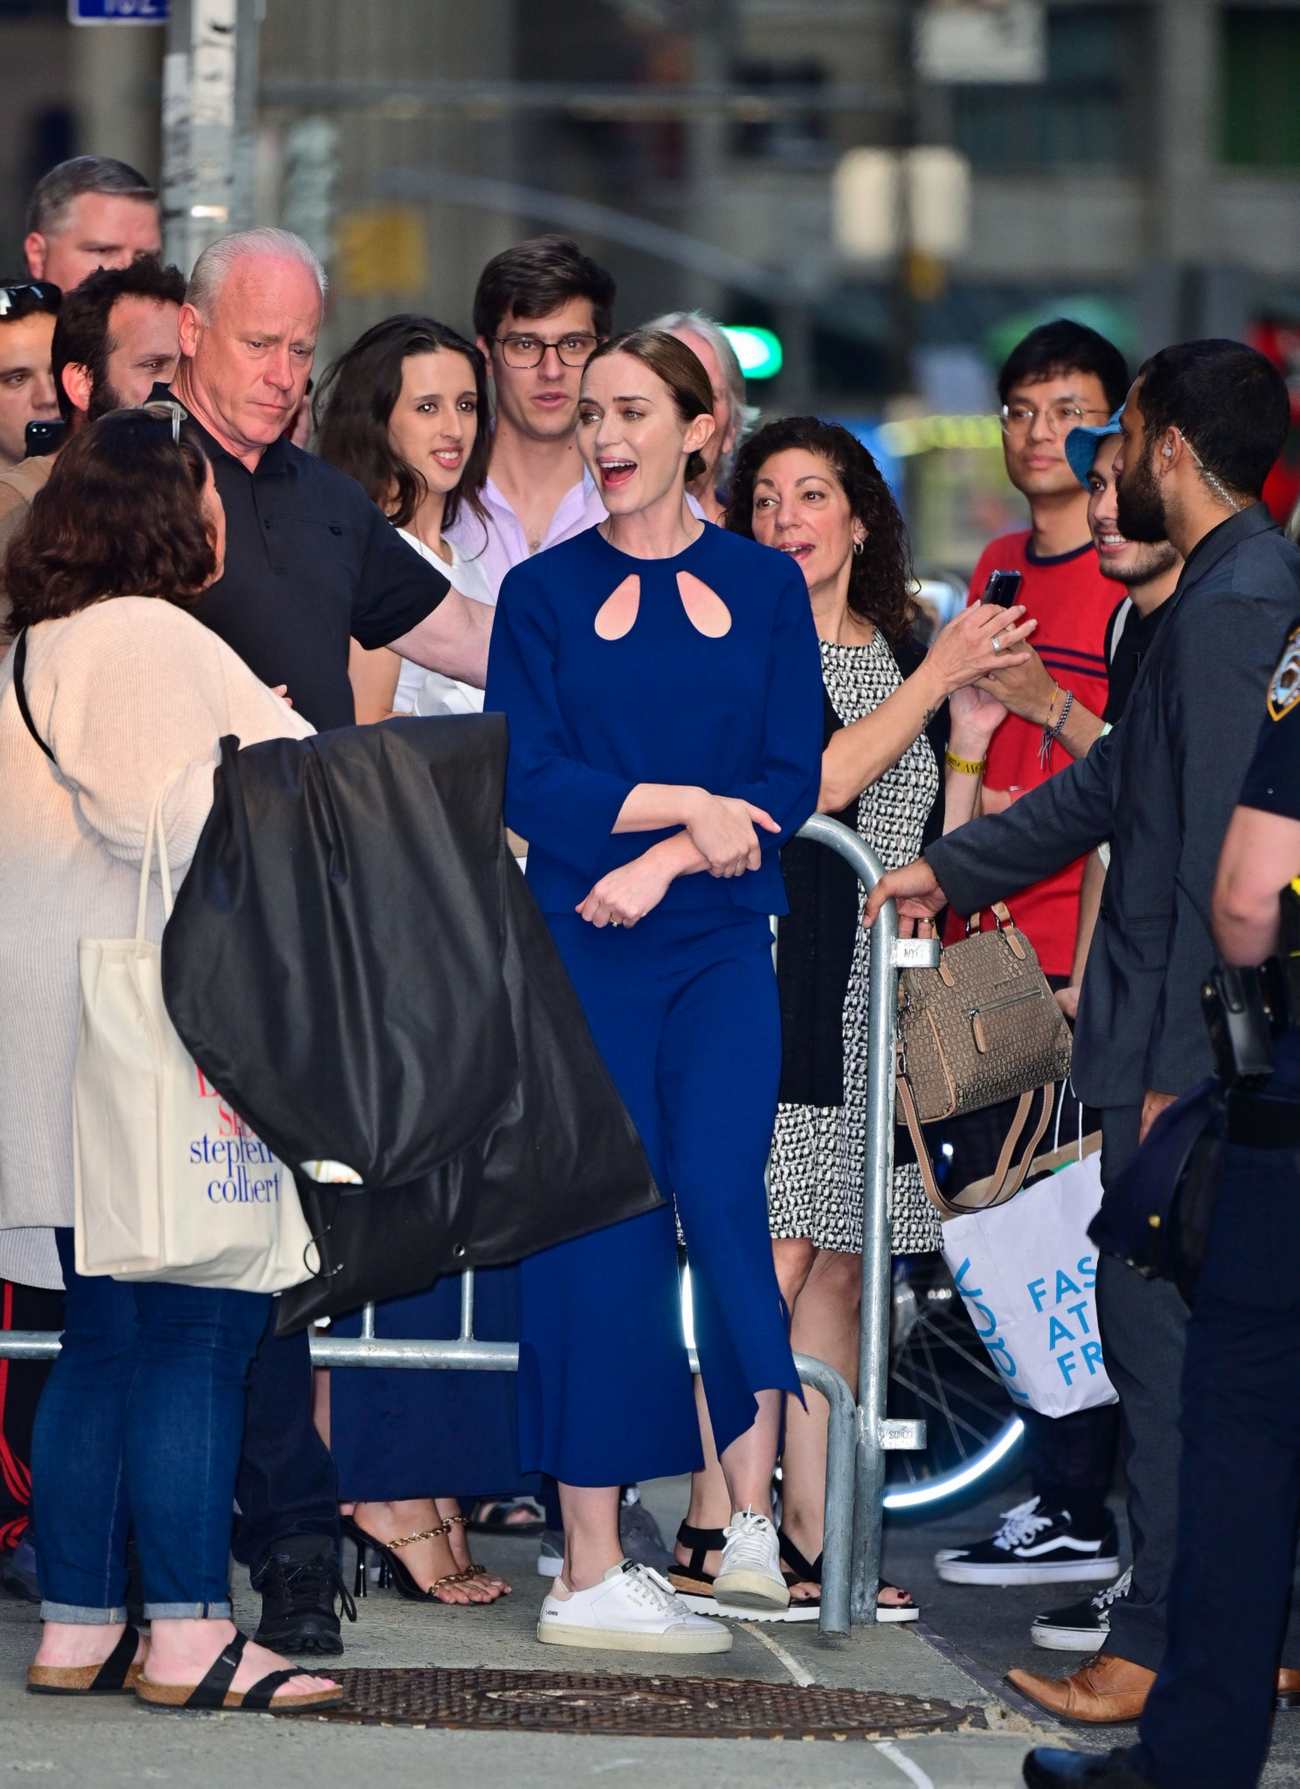 Emily_Blunt_visits_The_Late_Show_with_Stephen_Colbert_at_the_Ed_Sullivan_Theater_in_New_York_07152021_00005.jpg